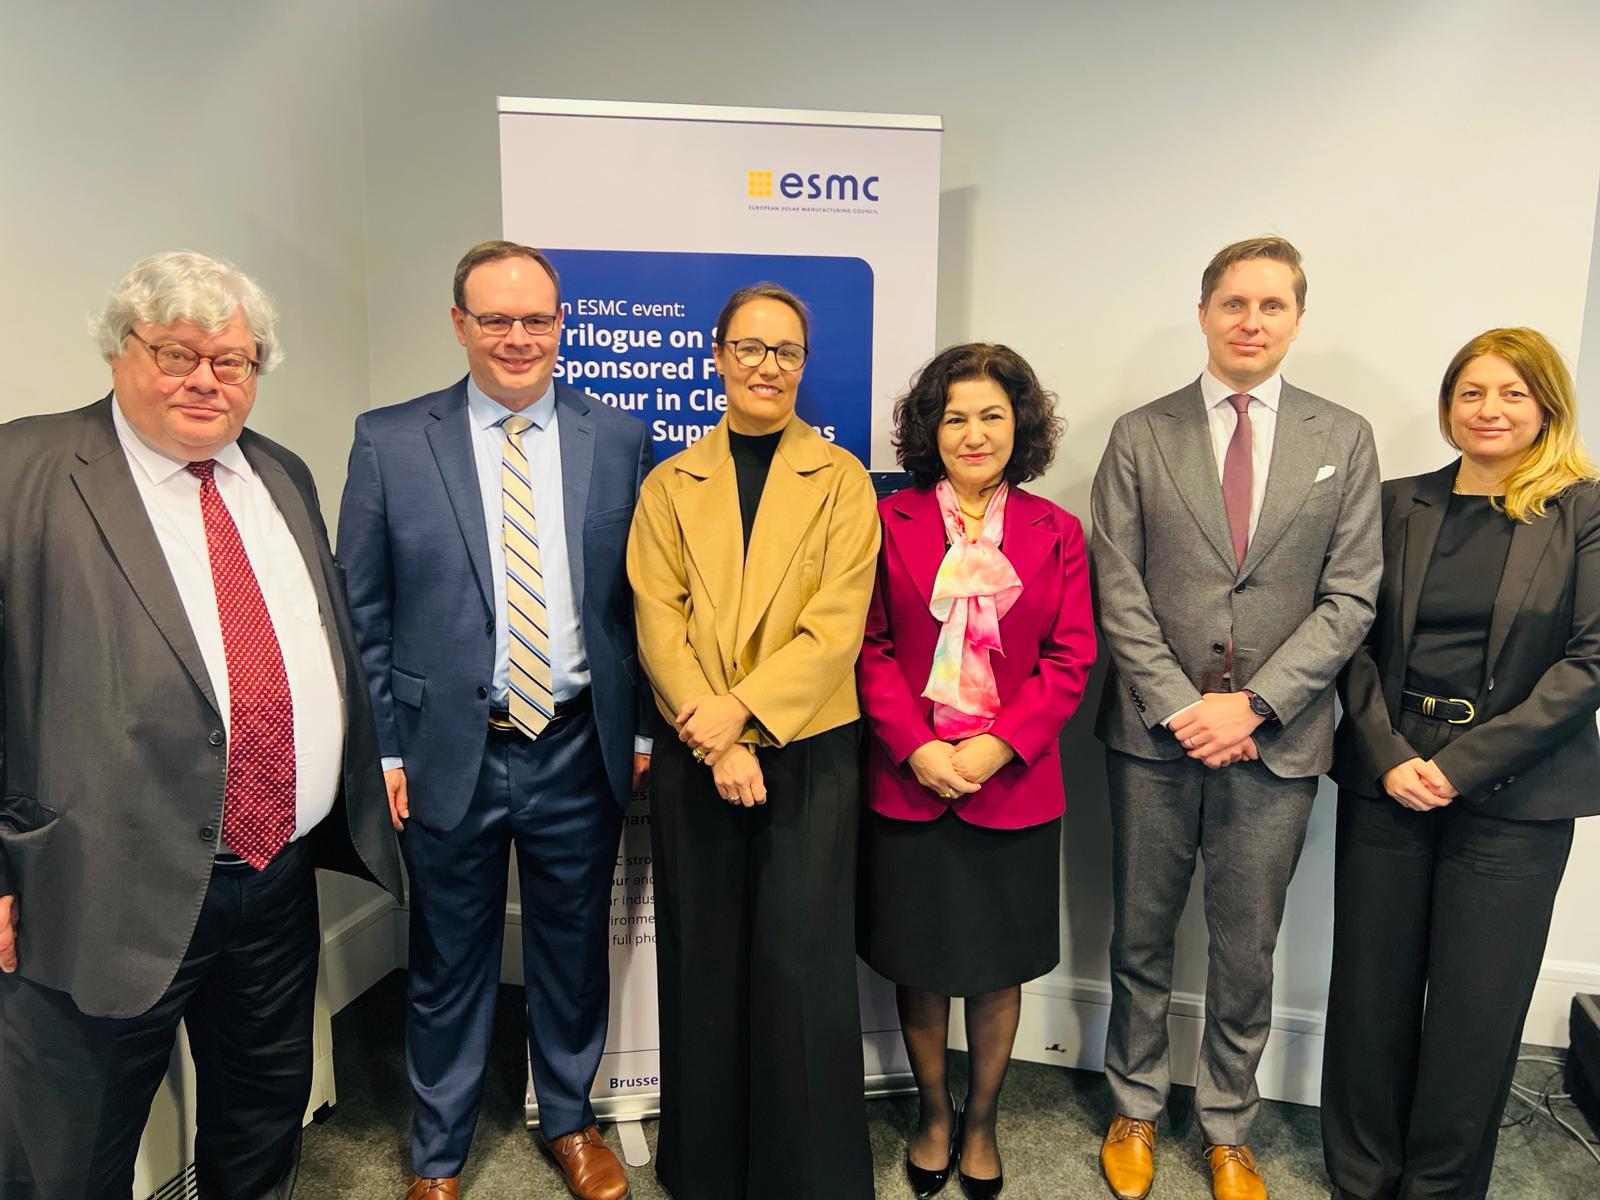 From right: Reinhard Bütikofer, Member of European Parliament, Adrian Zenz, Victims of Communism Foundation, Anja Lange, First Solar, Rushan Abbas, Campaign for Uyghurs, Johan Lindahl, ESMC, Patricia Carrier, Coalition to End Forced Labour in the Uyghur Region